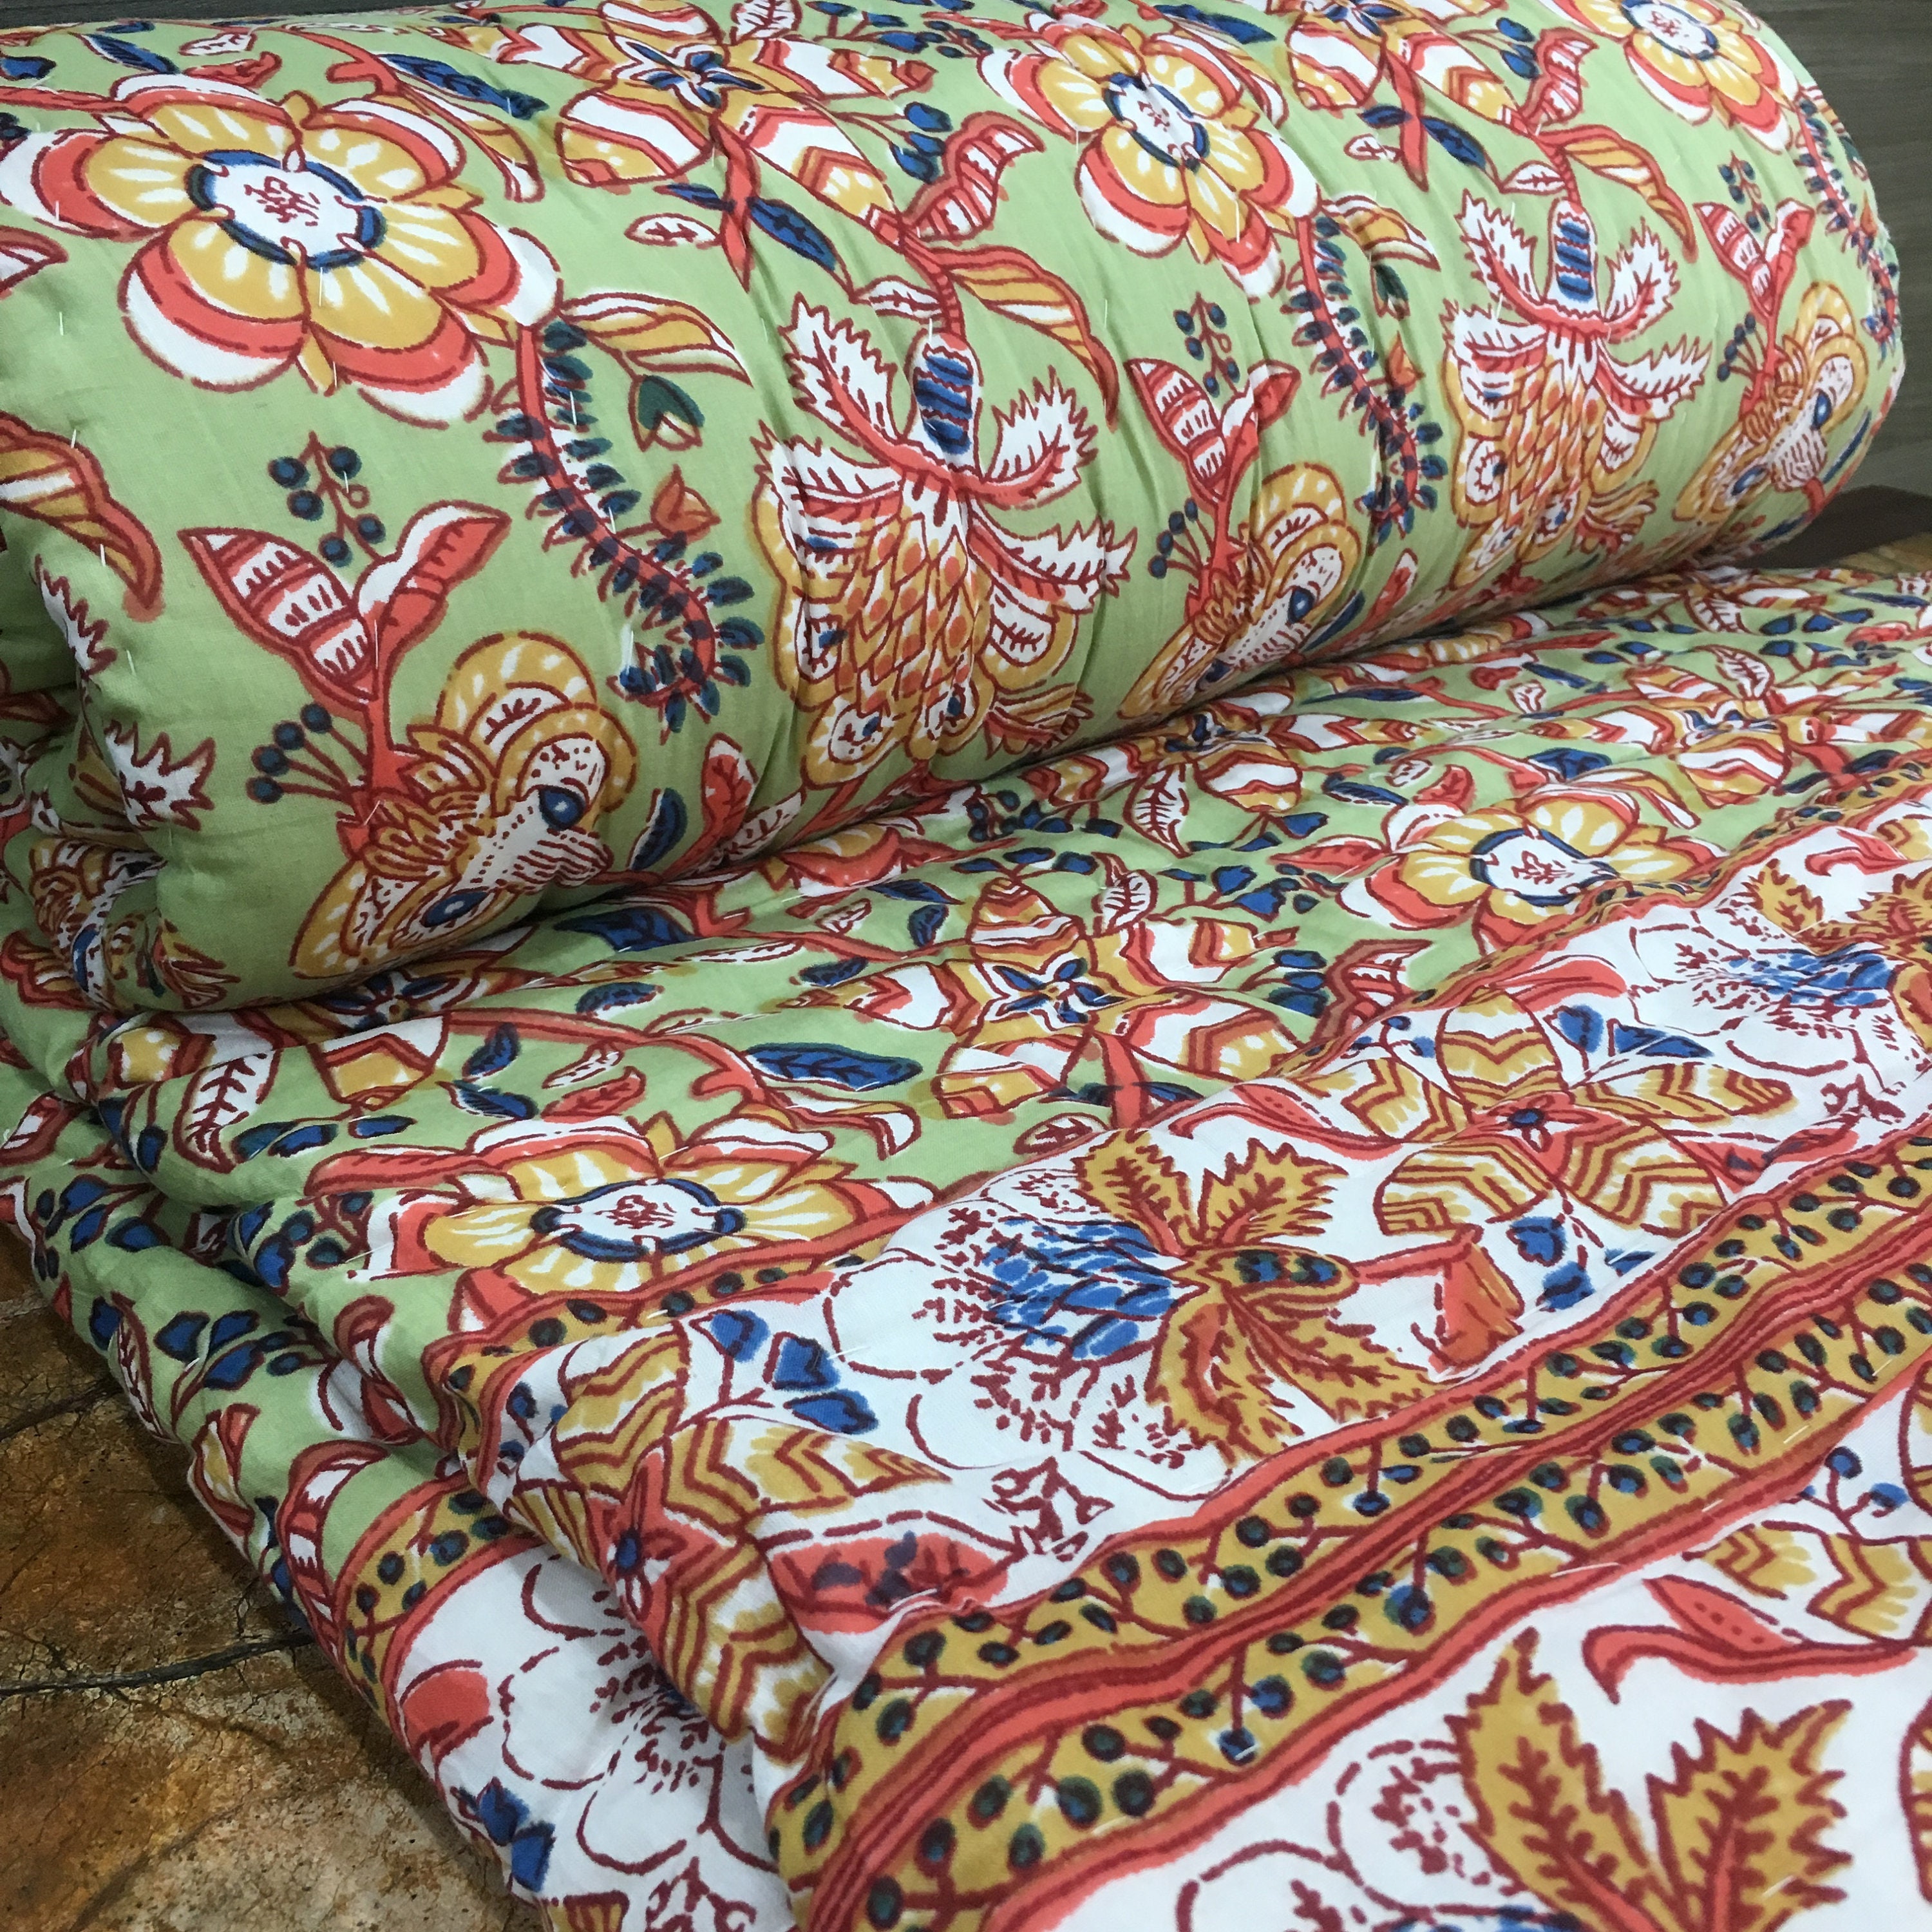 Quilt California King Block Print Quilt Queen Handmade Jaipur Quilt Rajai Padded Blanket Quilted Throw Indian Cotton Reversible Quilt Gift